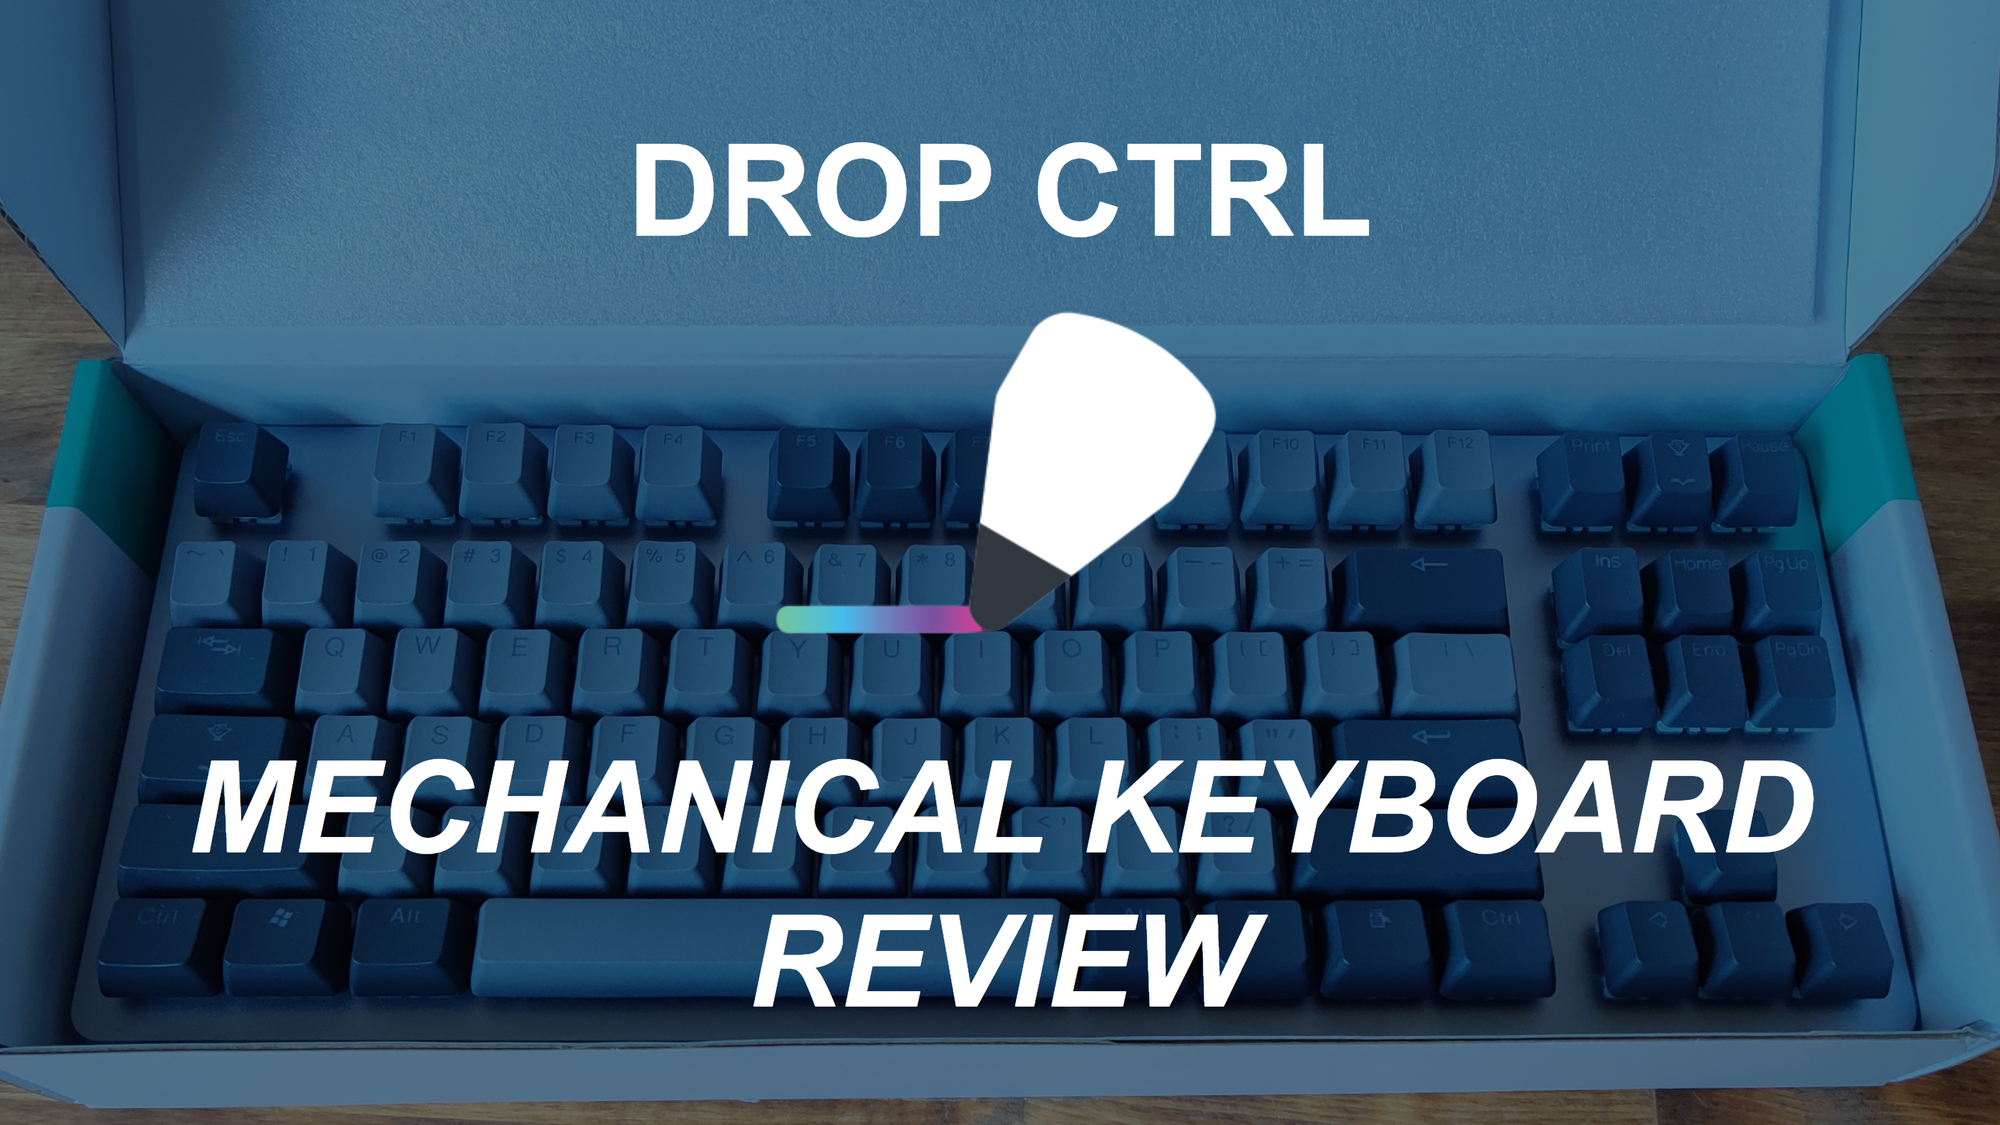 Drop CTRL Mechanical Keyboard Review (After 18 Months of Use)